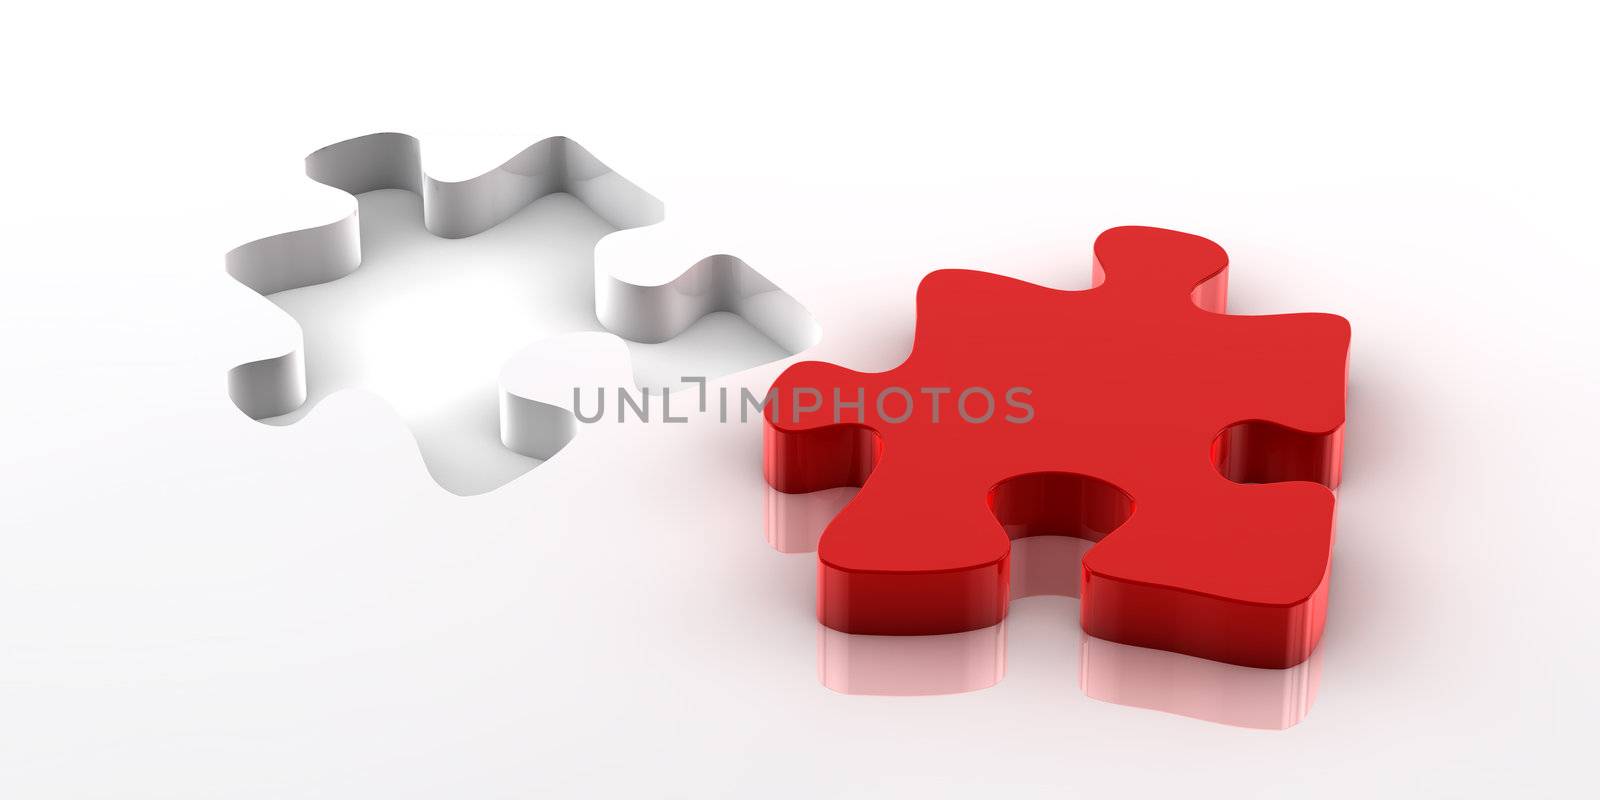 A red piece of a jigsaw puzzle fitting in the hole on the bottom